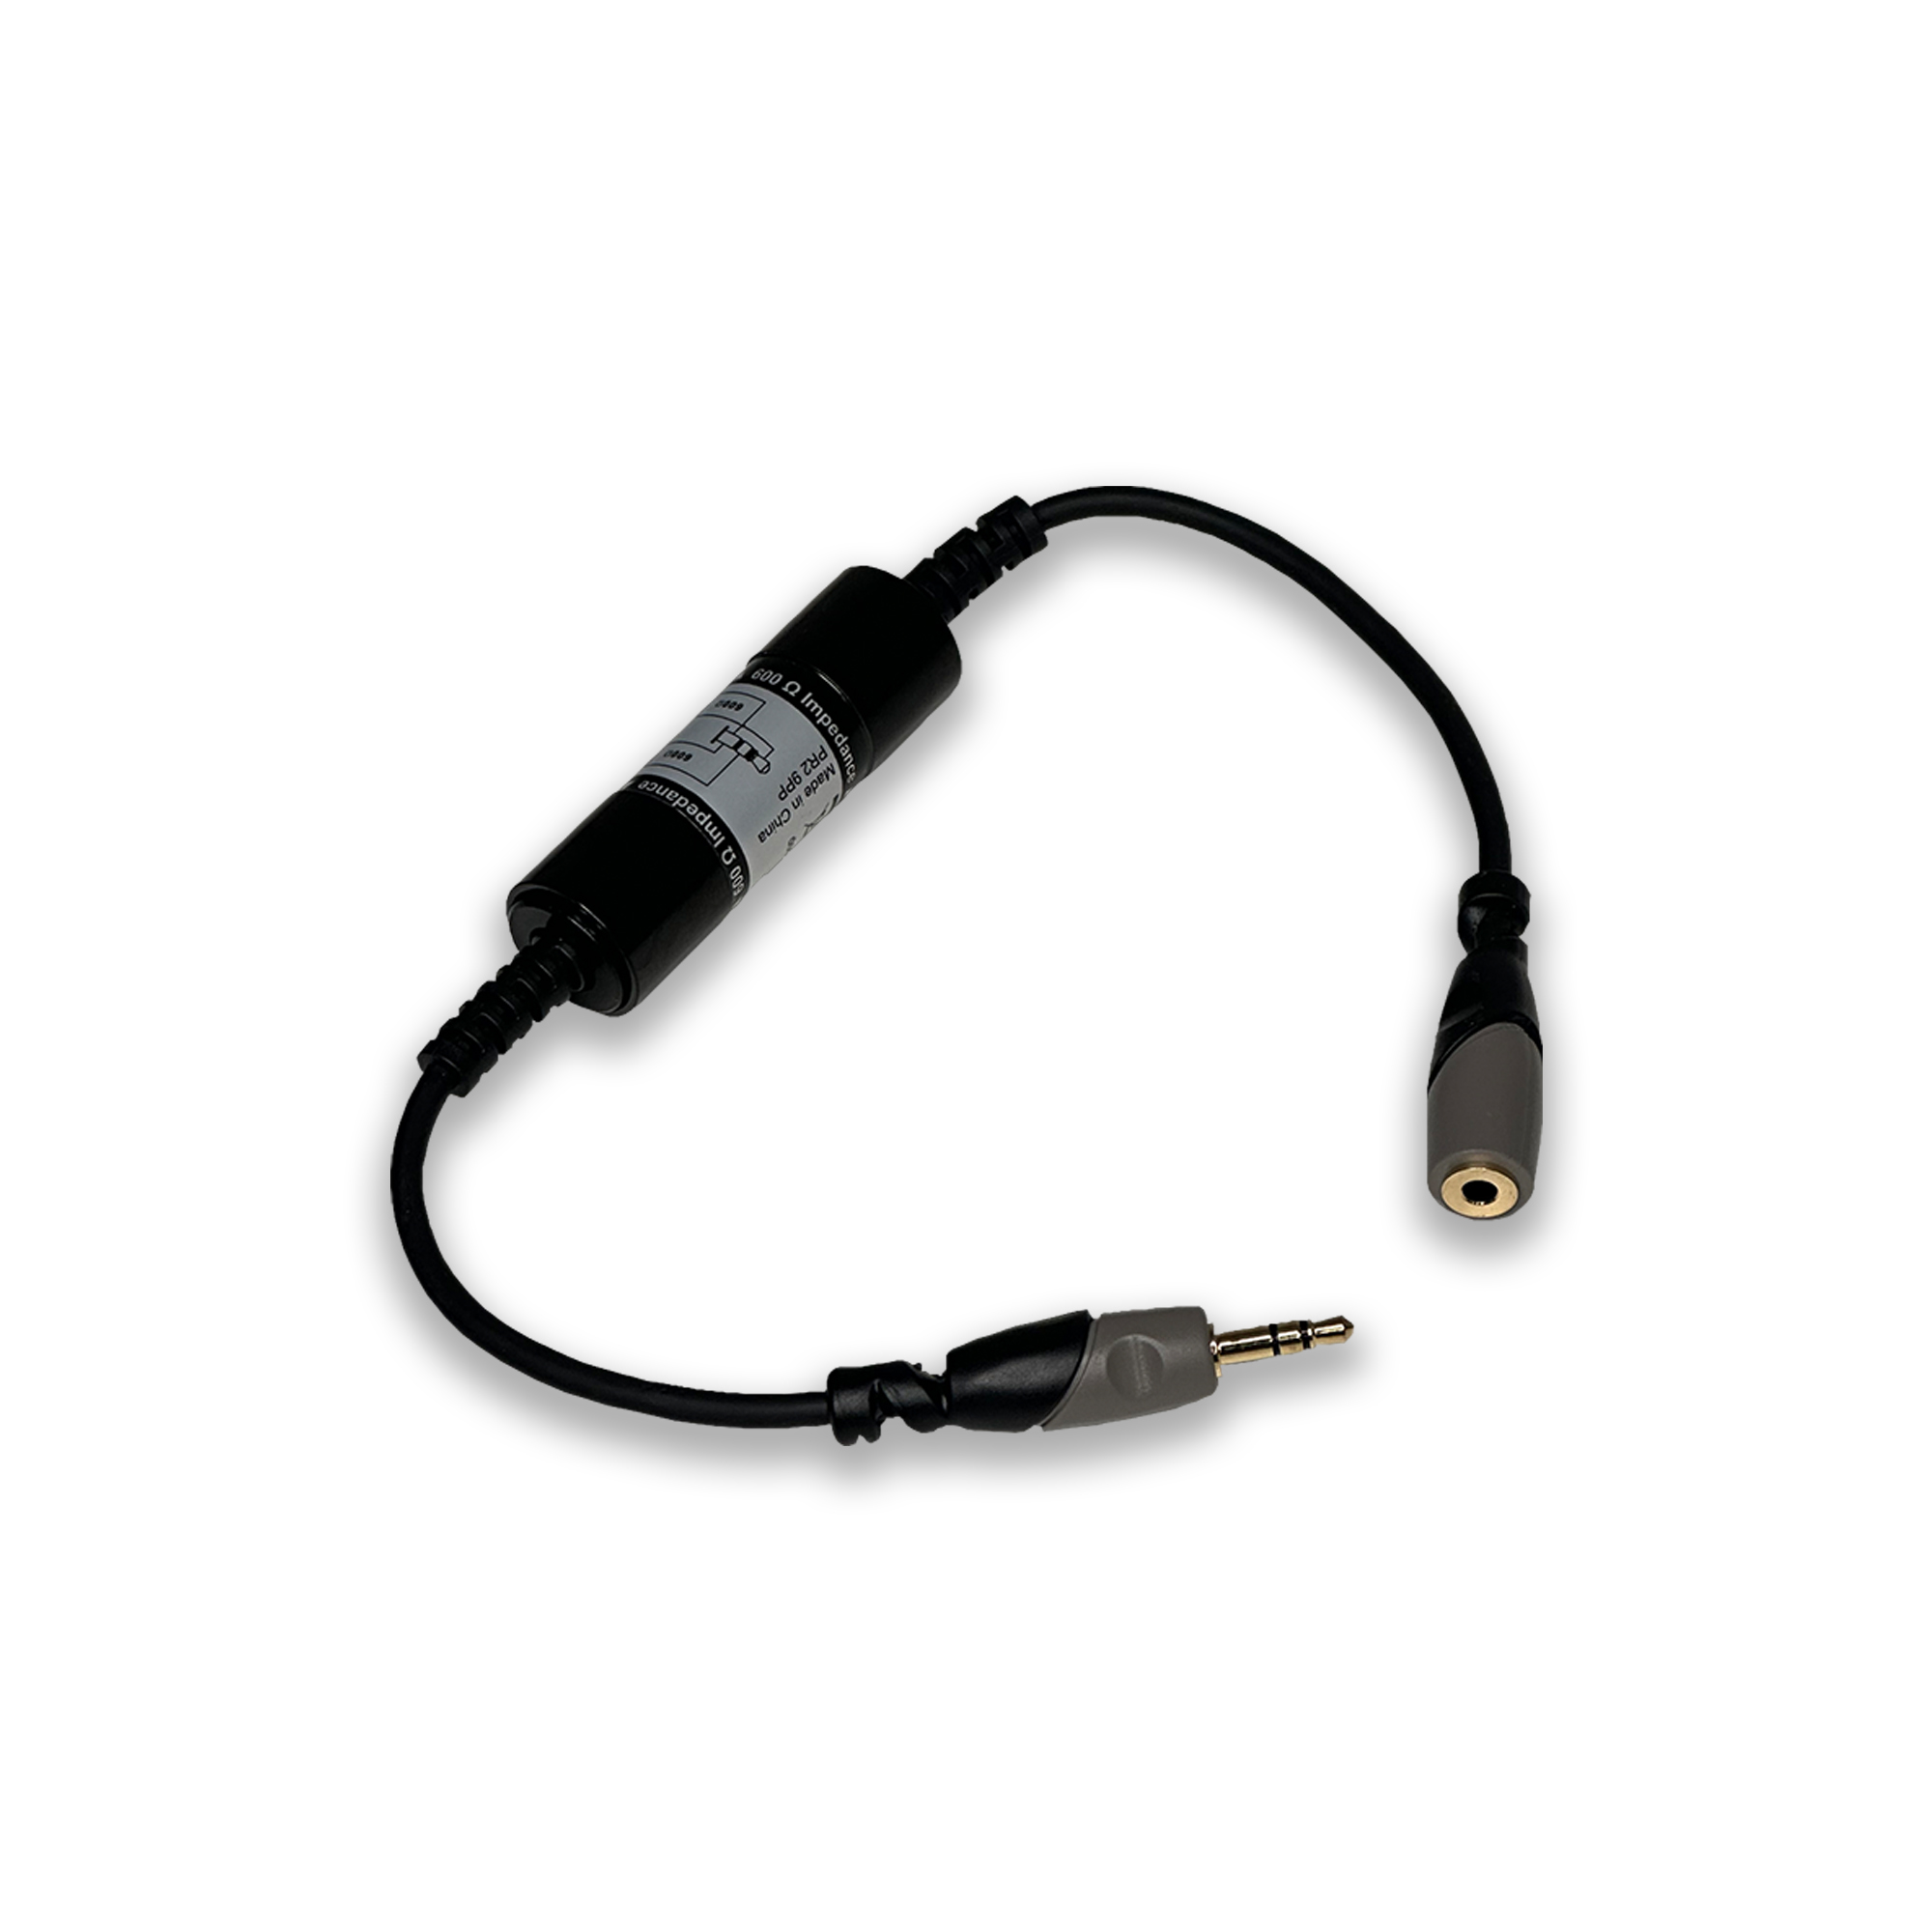 How To Ground 3.5 Mm Audio Cable